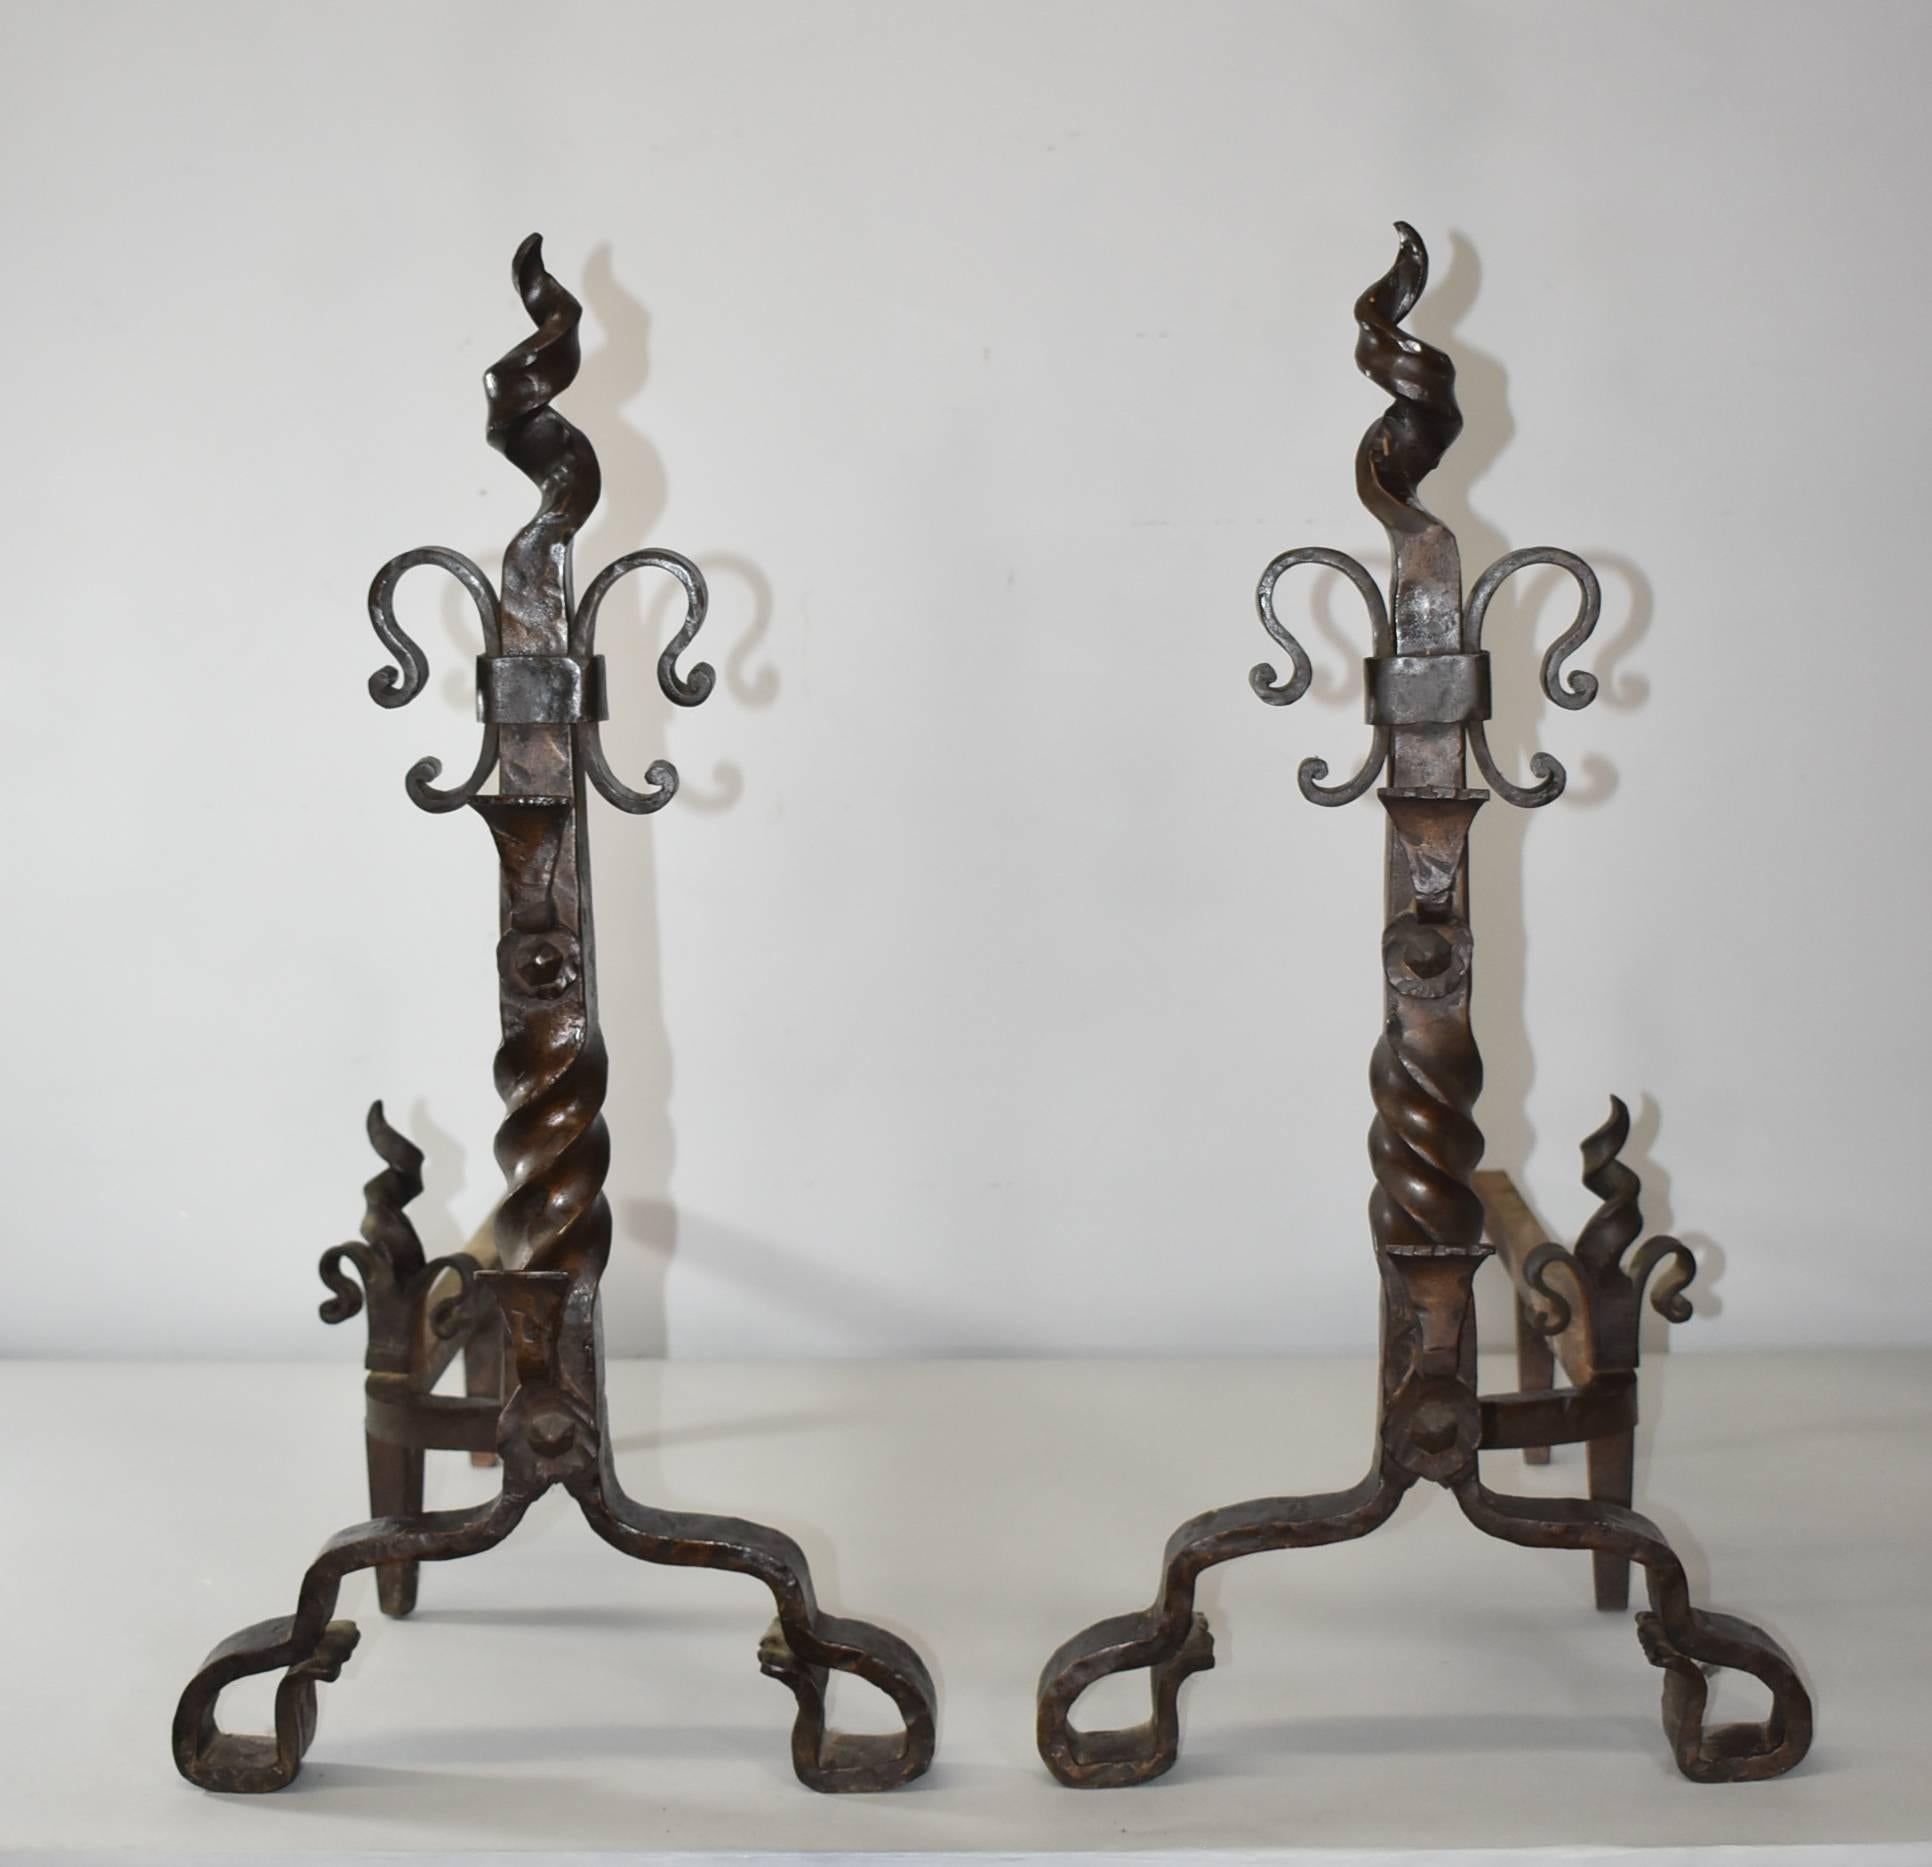 A handsome pair of Gothic revival hammered forged iron andirons that are attributed to Samuel Yellen. Very sturdy these andirons feature a twisted top and centre column. The dimensions are 26